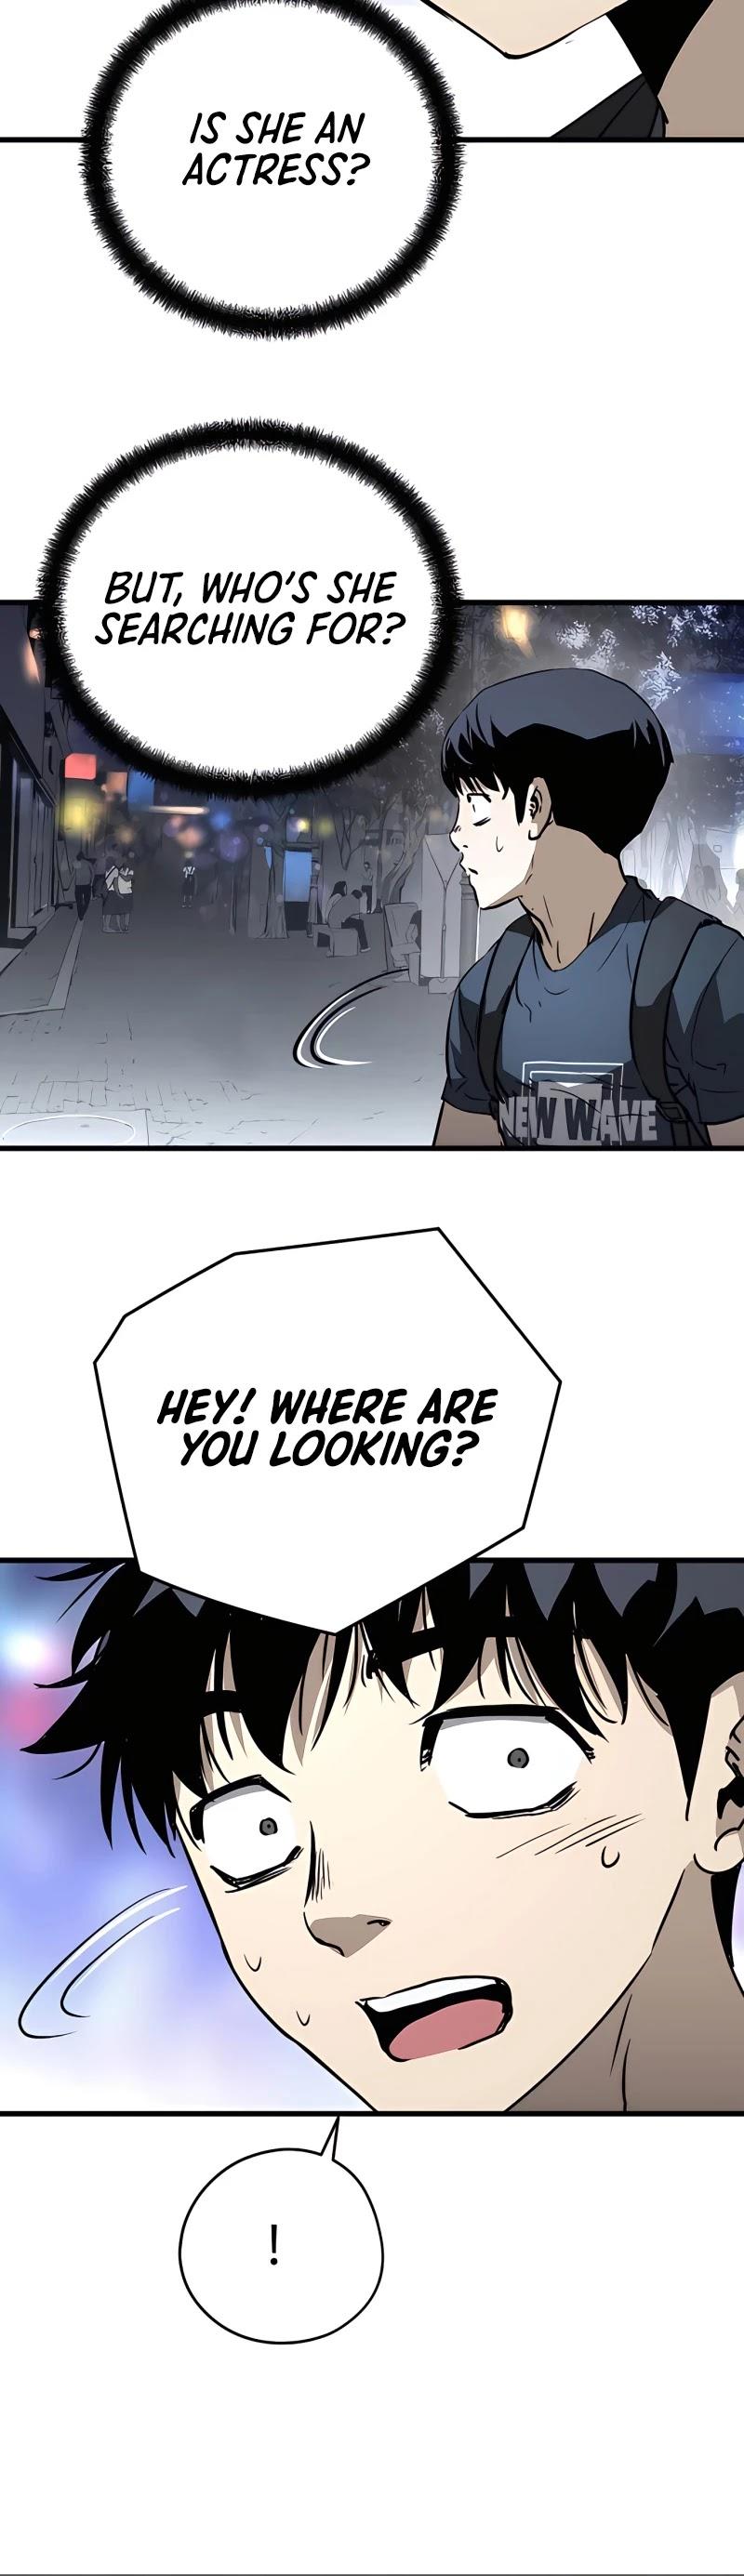 The Breaker: Eternal Force Chapter 5 page 77 - 